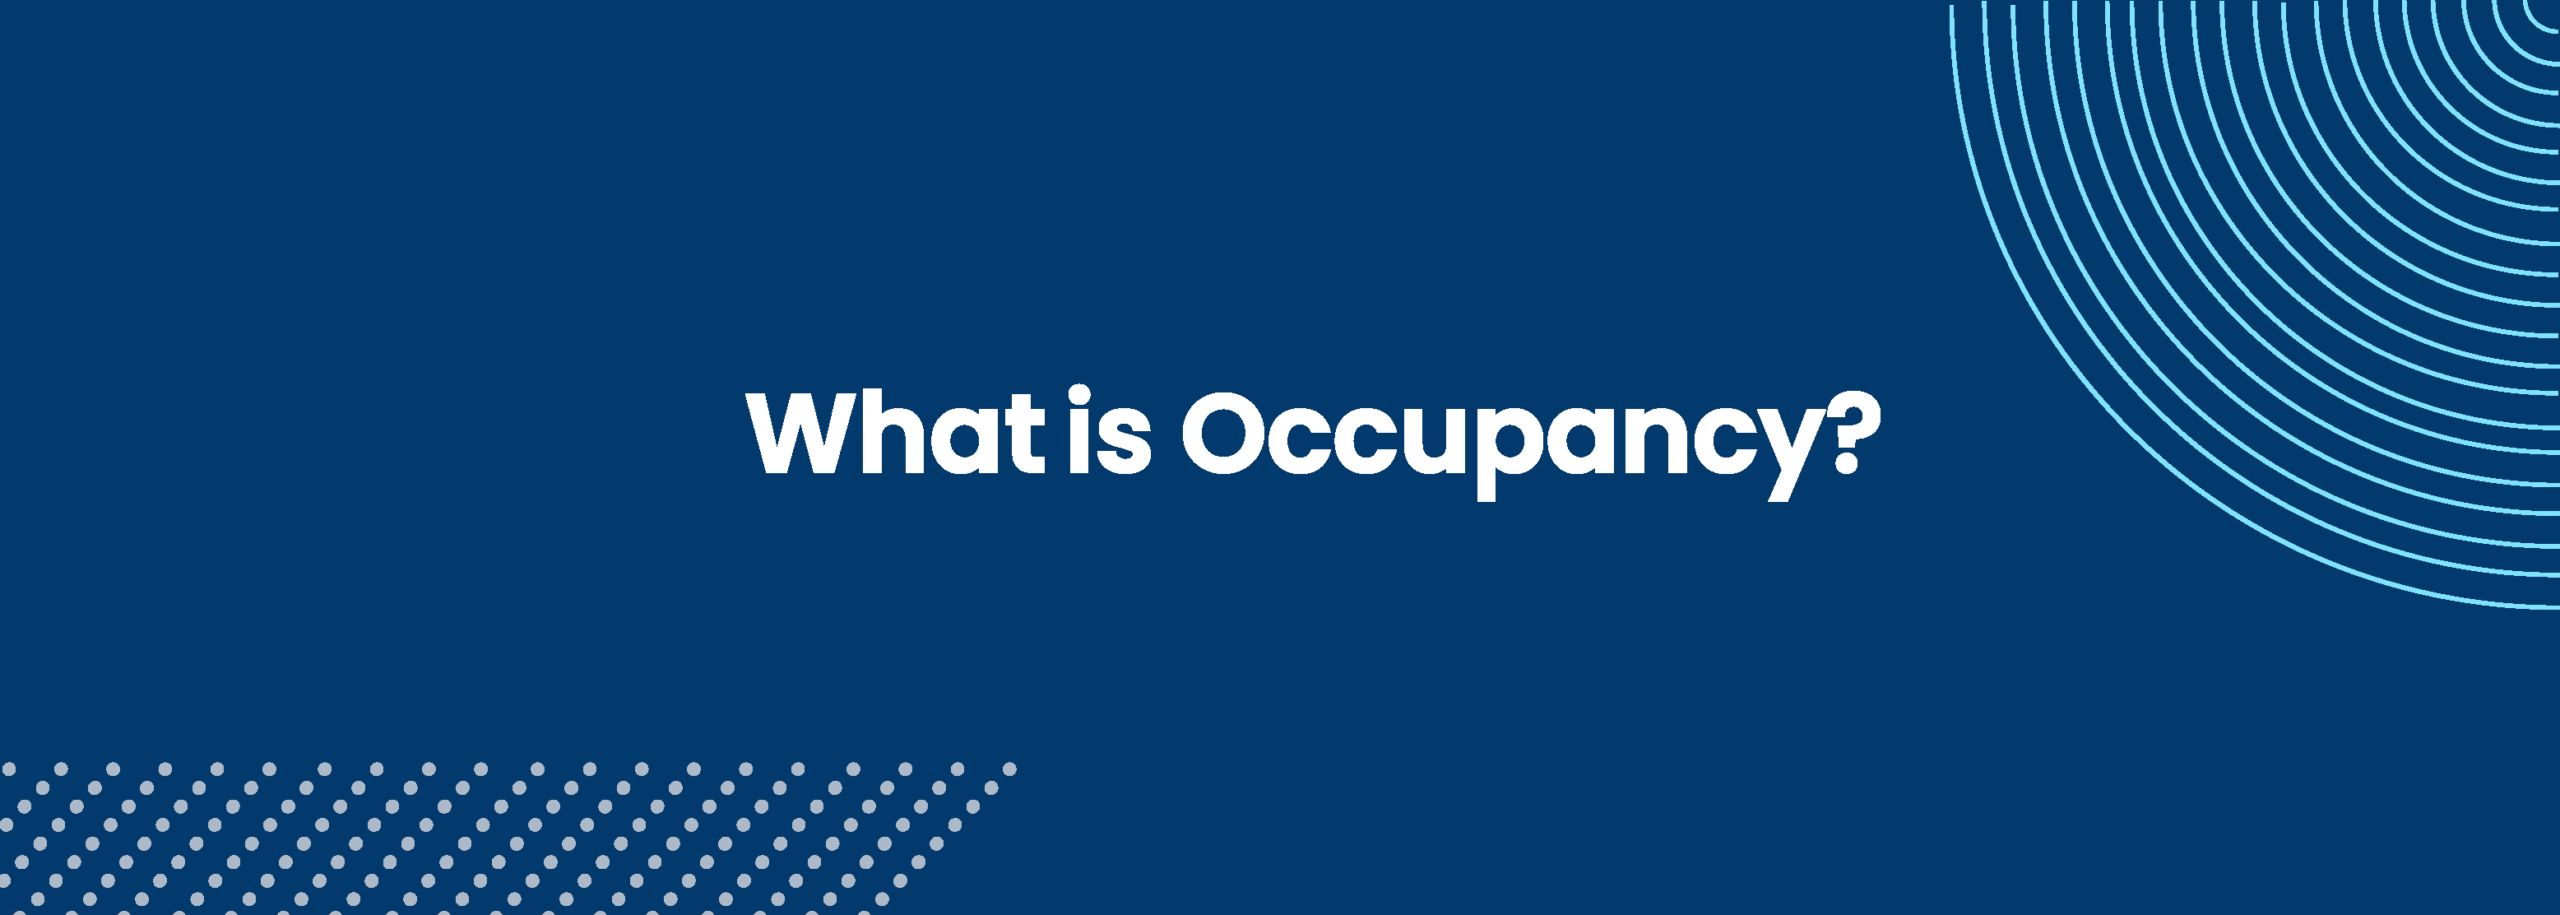 Occupancy is a legal term that refers to how a person can use land or a building.